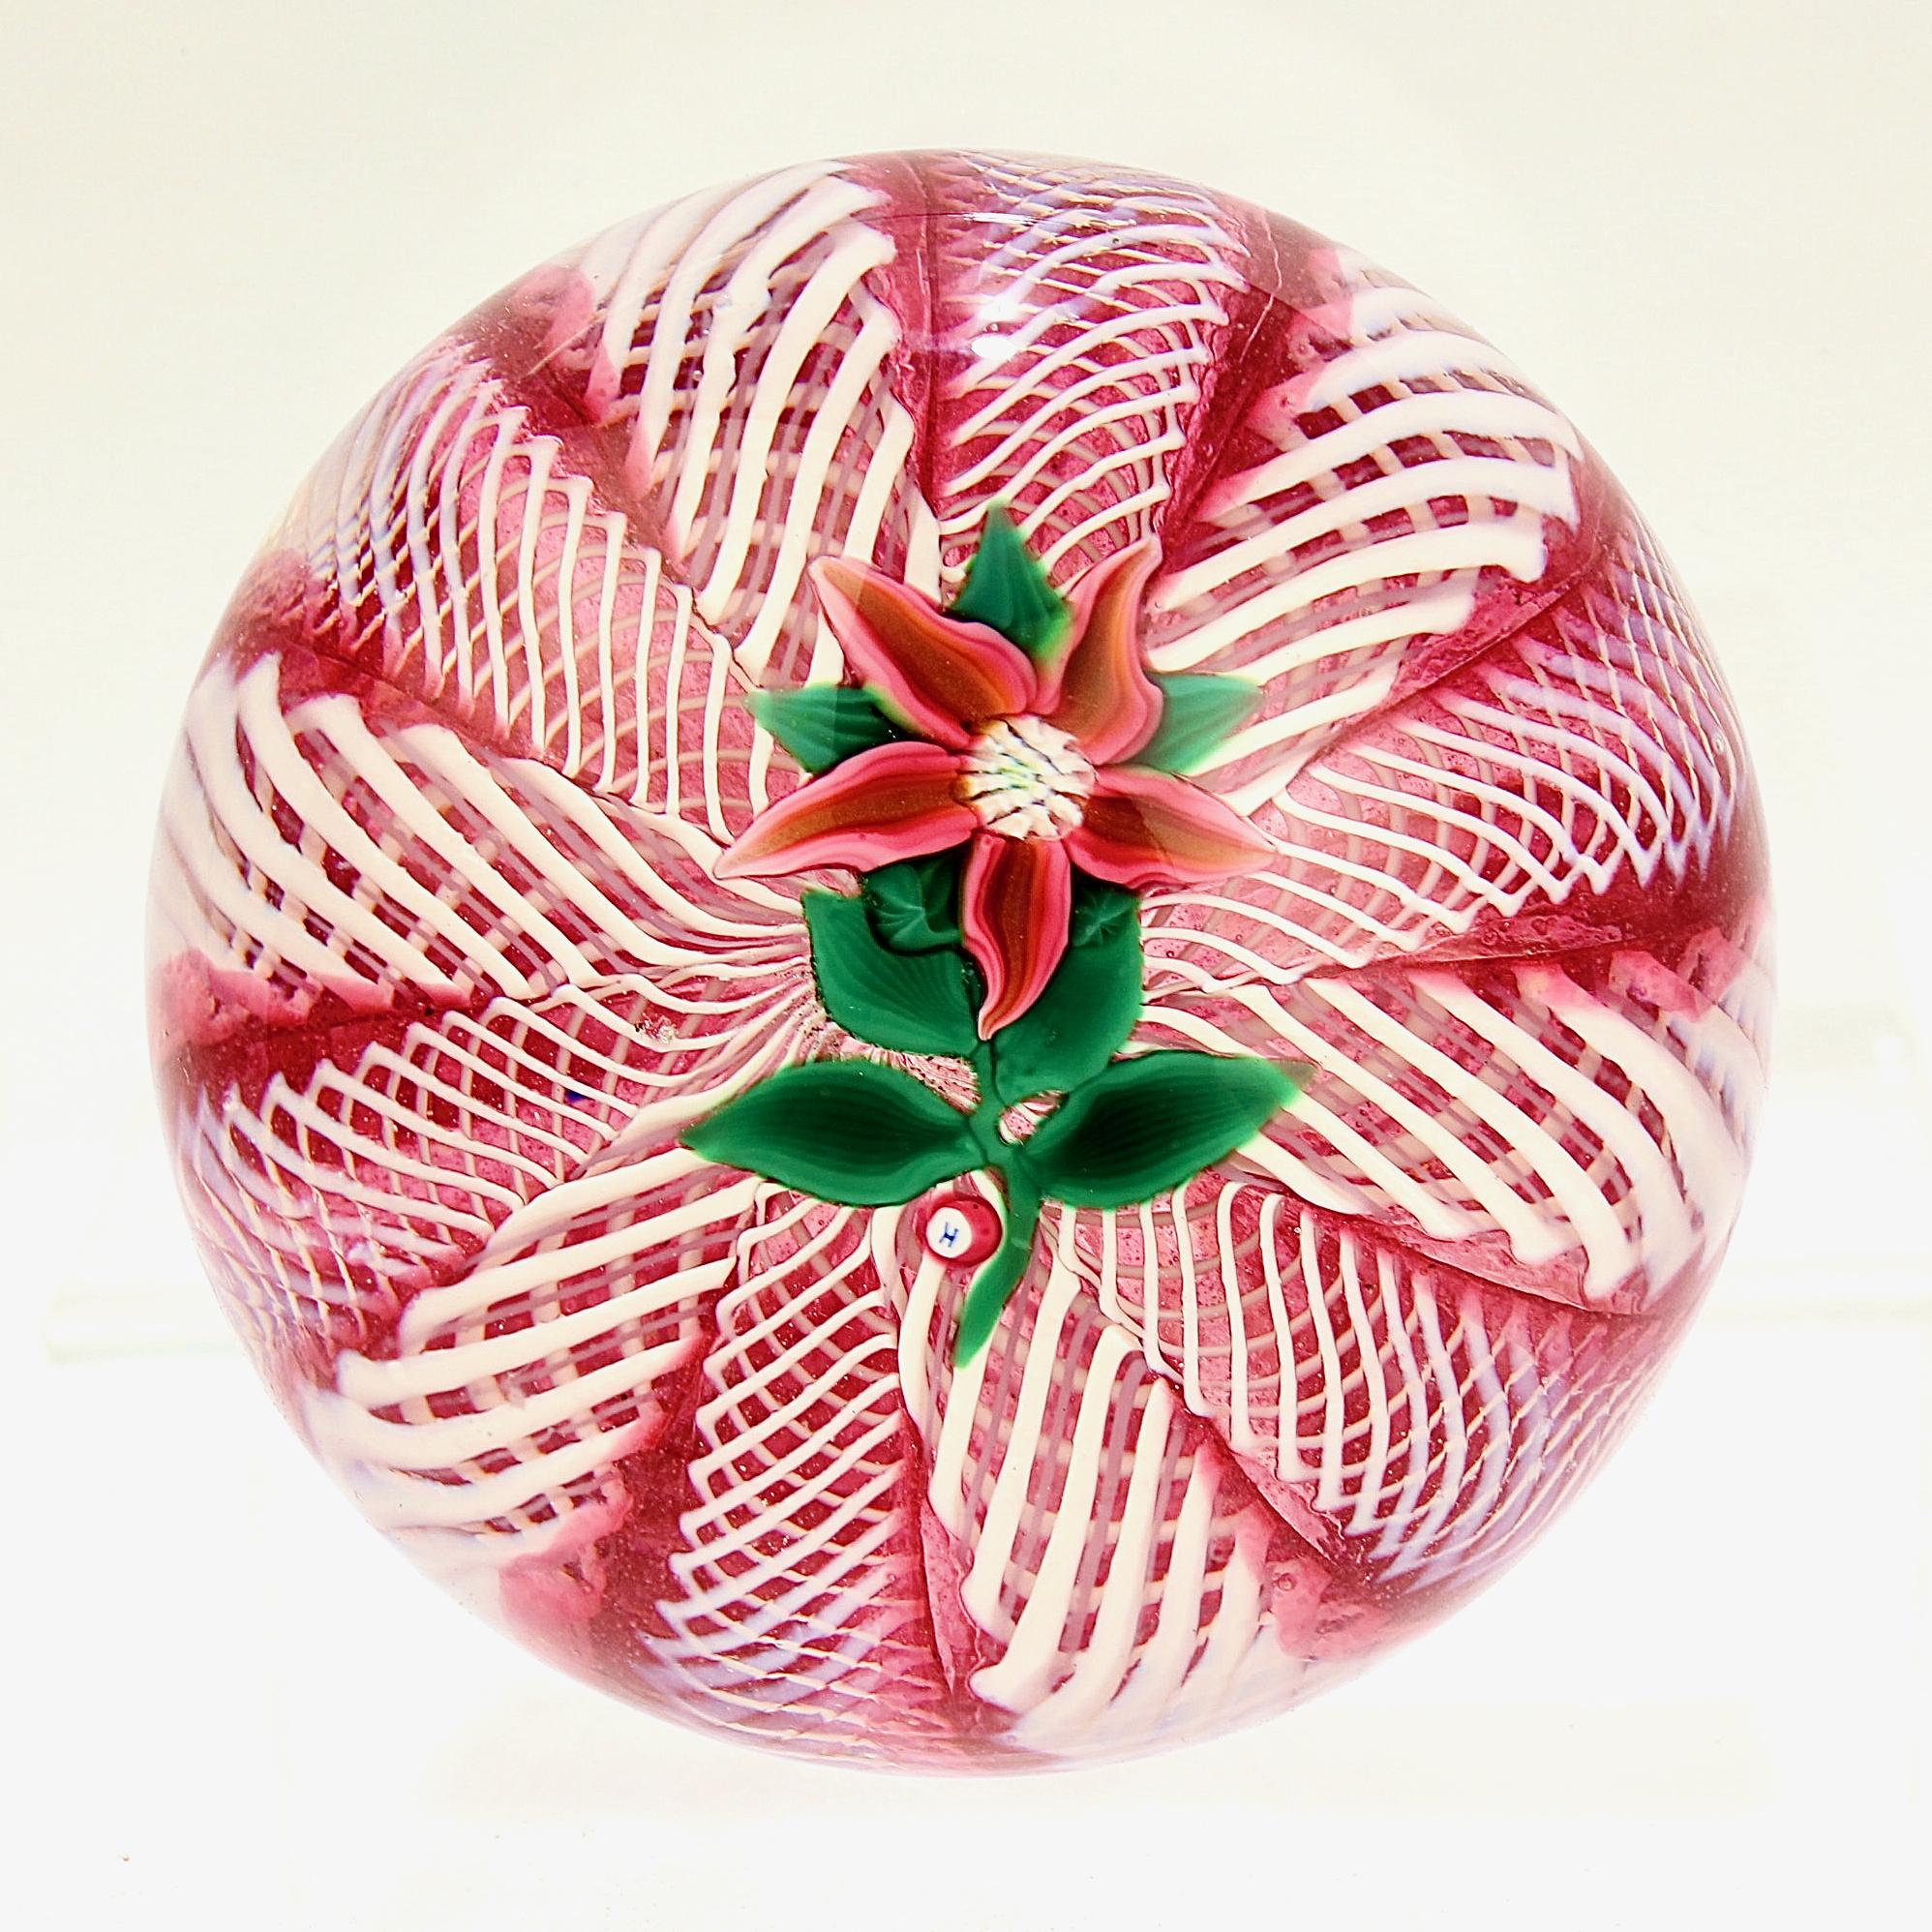 A fine Paul Ysart glass paperweight.

It has a slightly off-center poinsettia flower on a pink and white latticinio ground.

It has an H cane for Harland Glass Studios below the flower.

Simply a wonderful paperwieght!

Date:
20th century

Overall